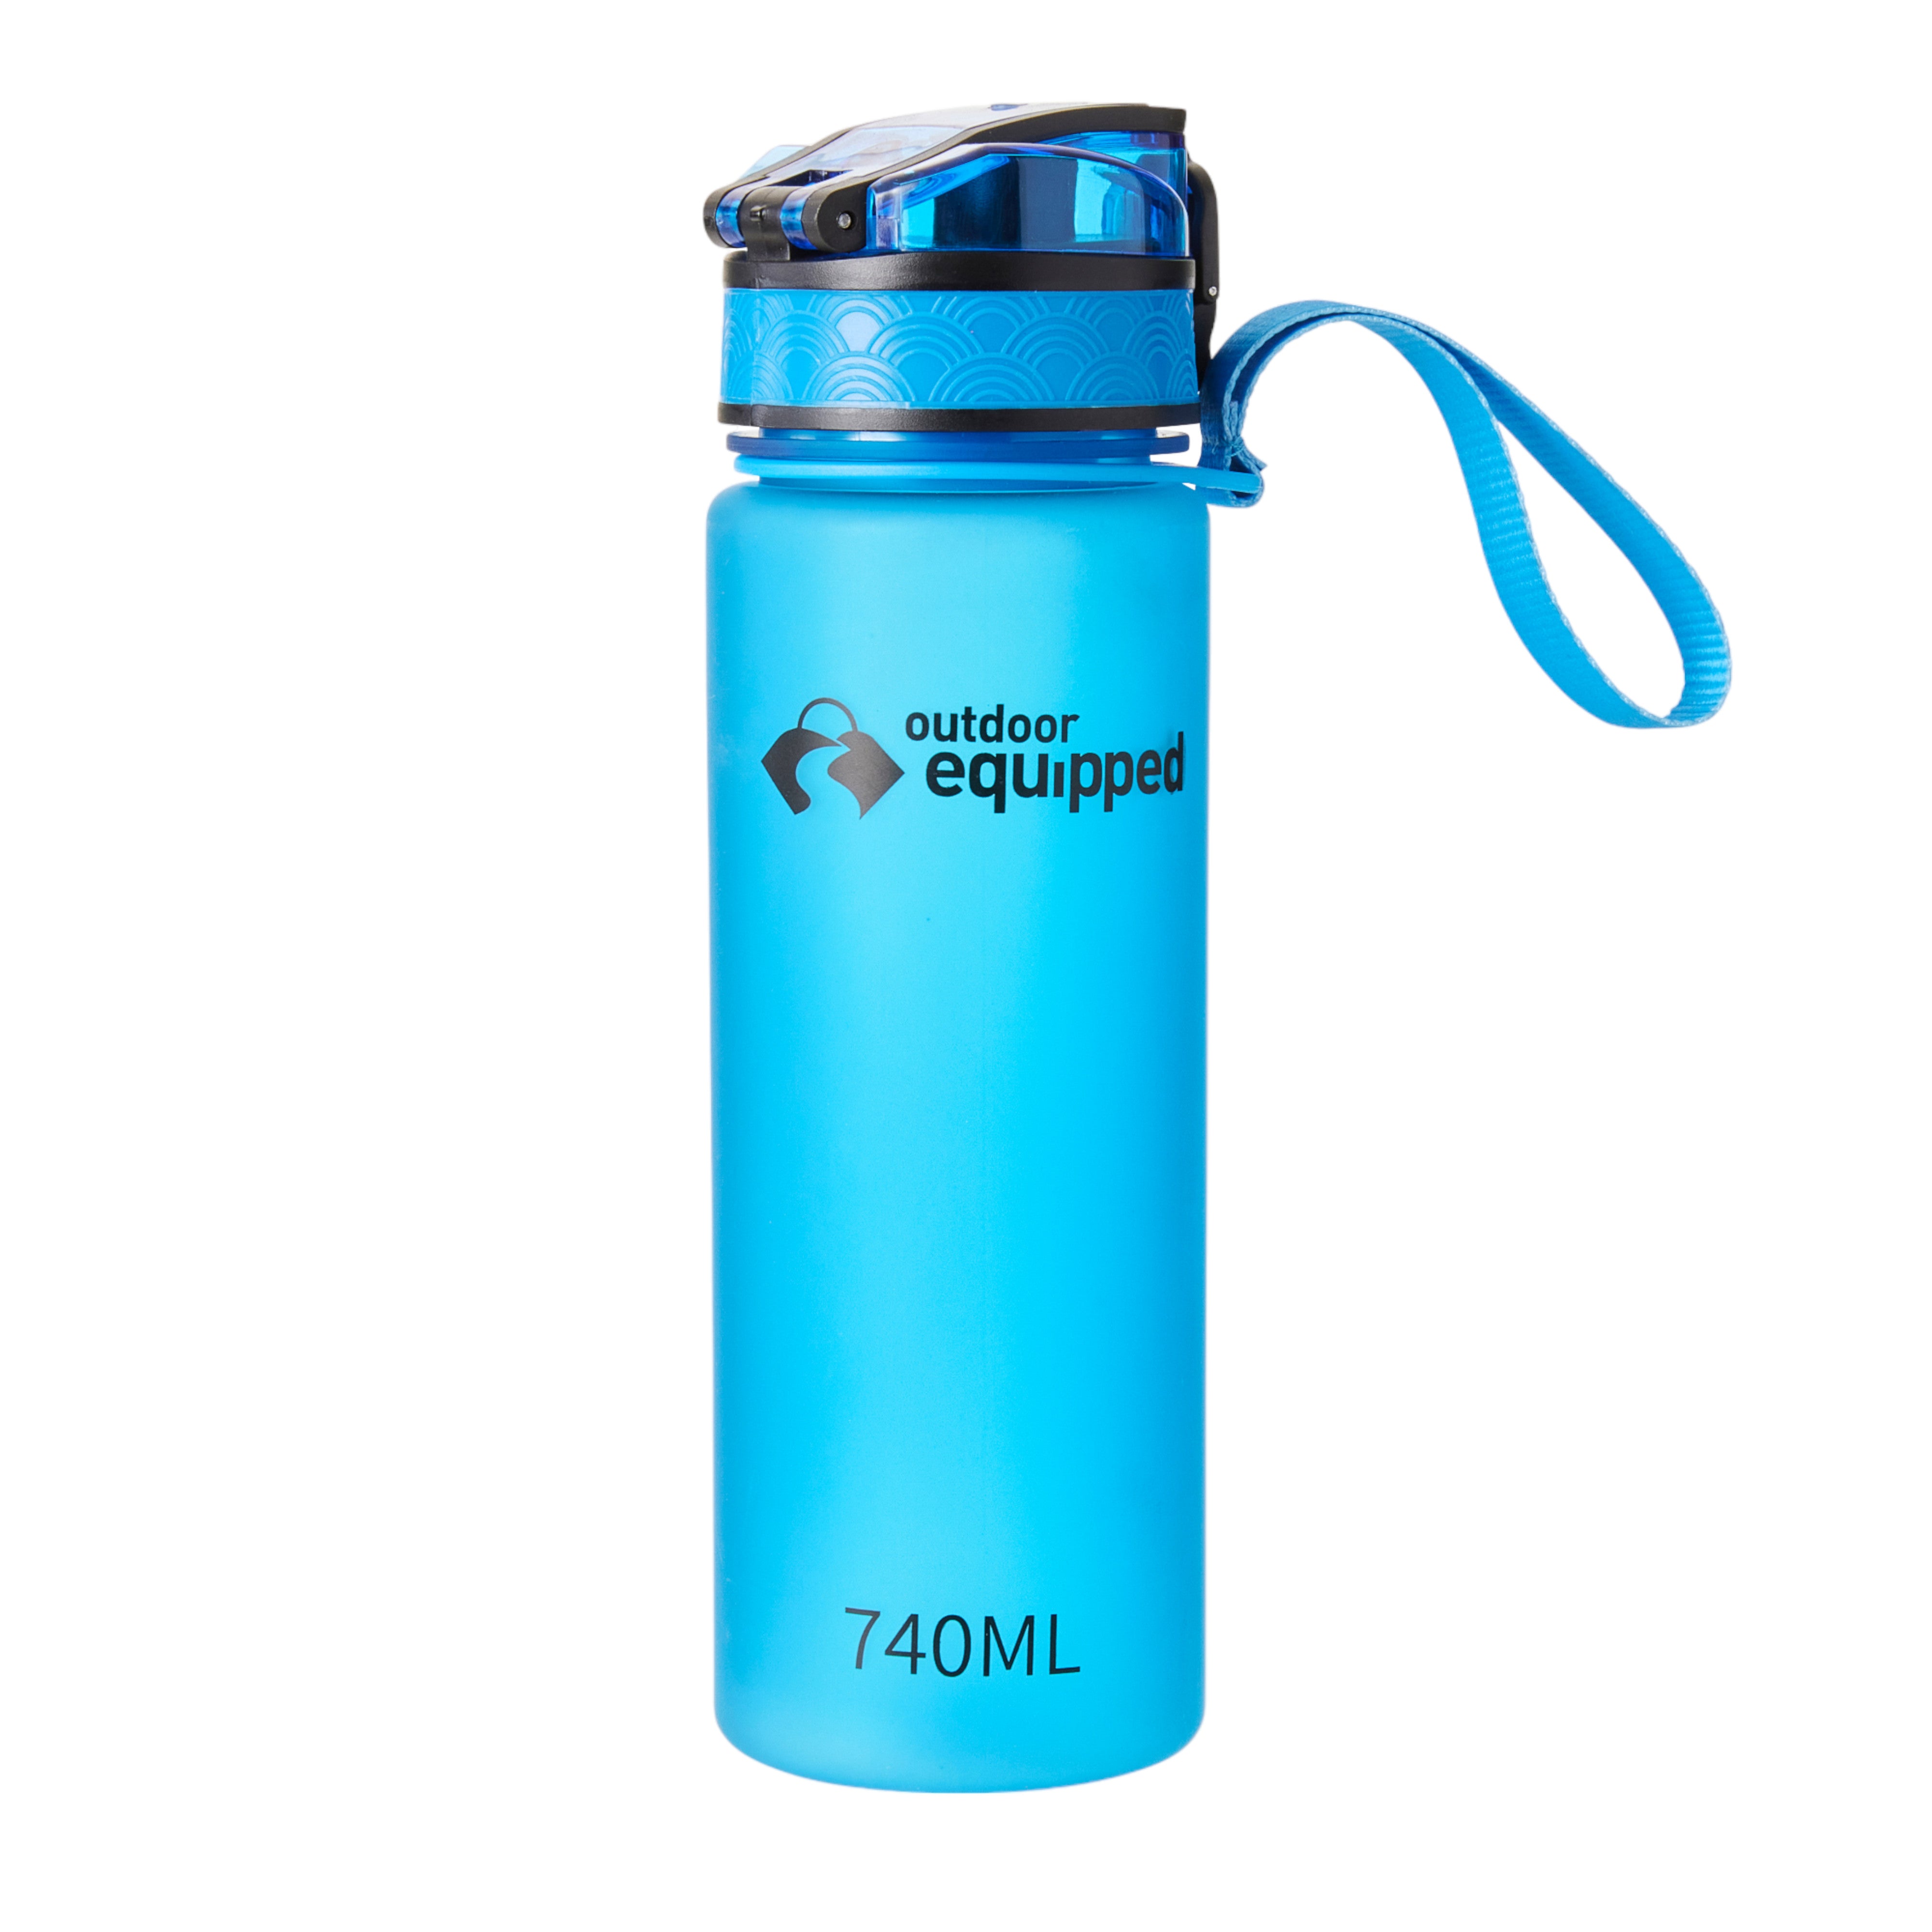 Outdoor Equipped 740ml Drink Bottle